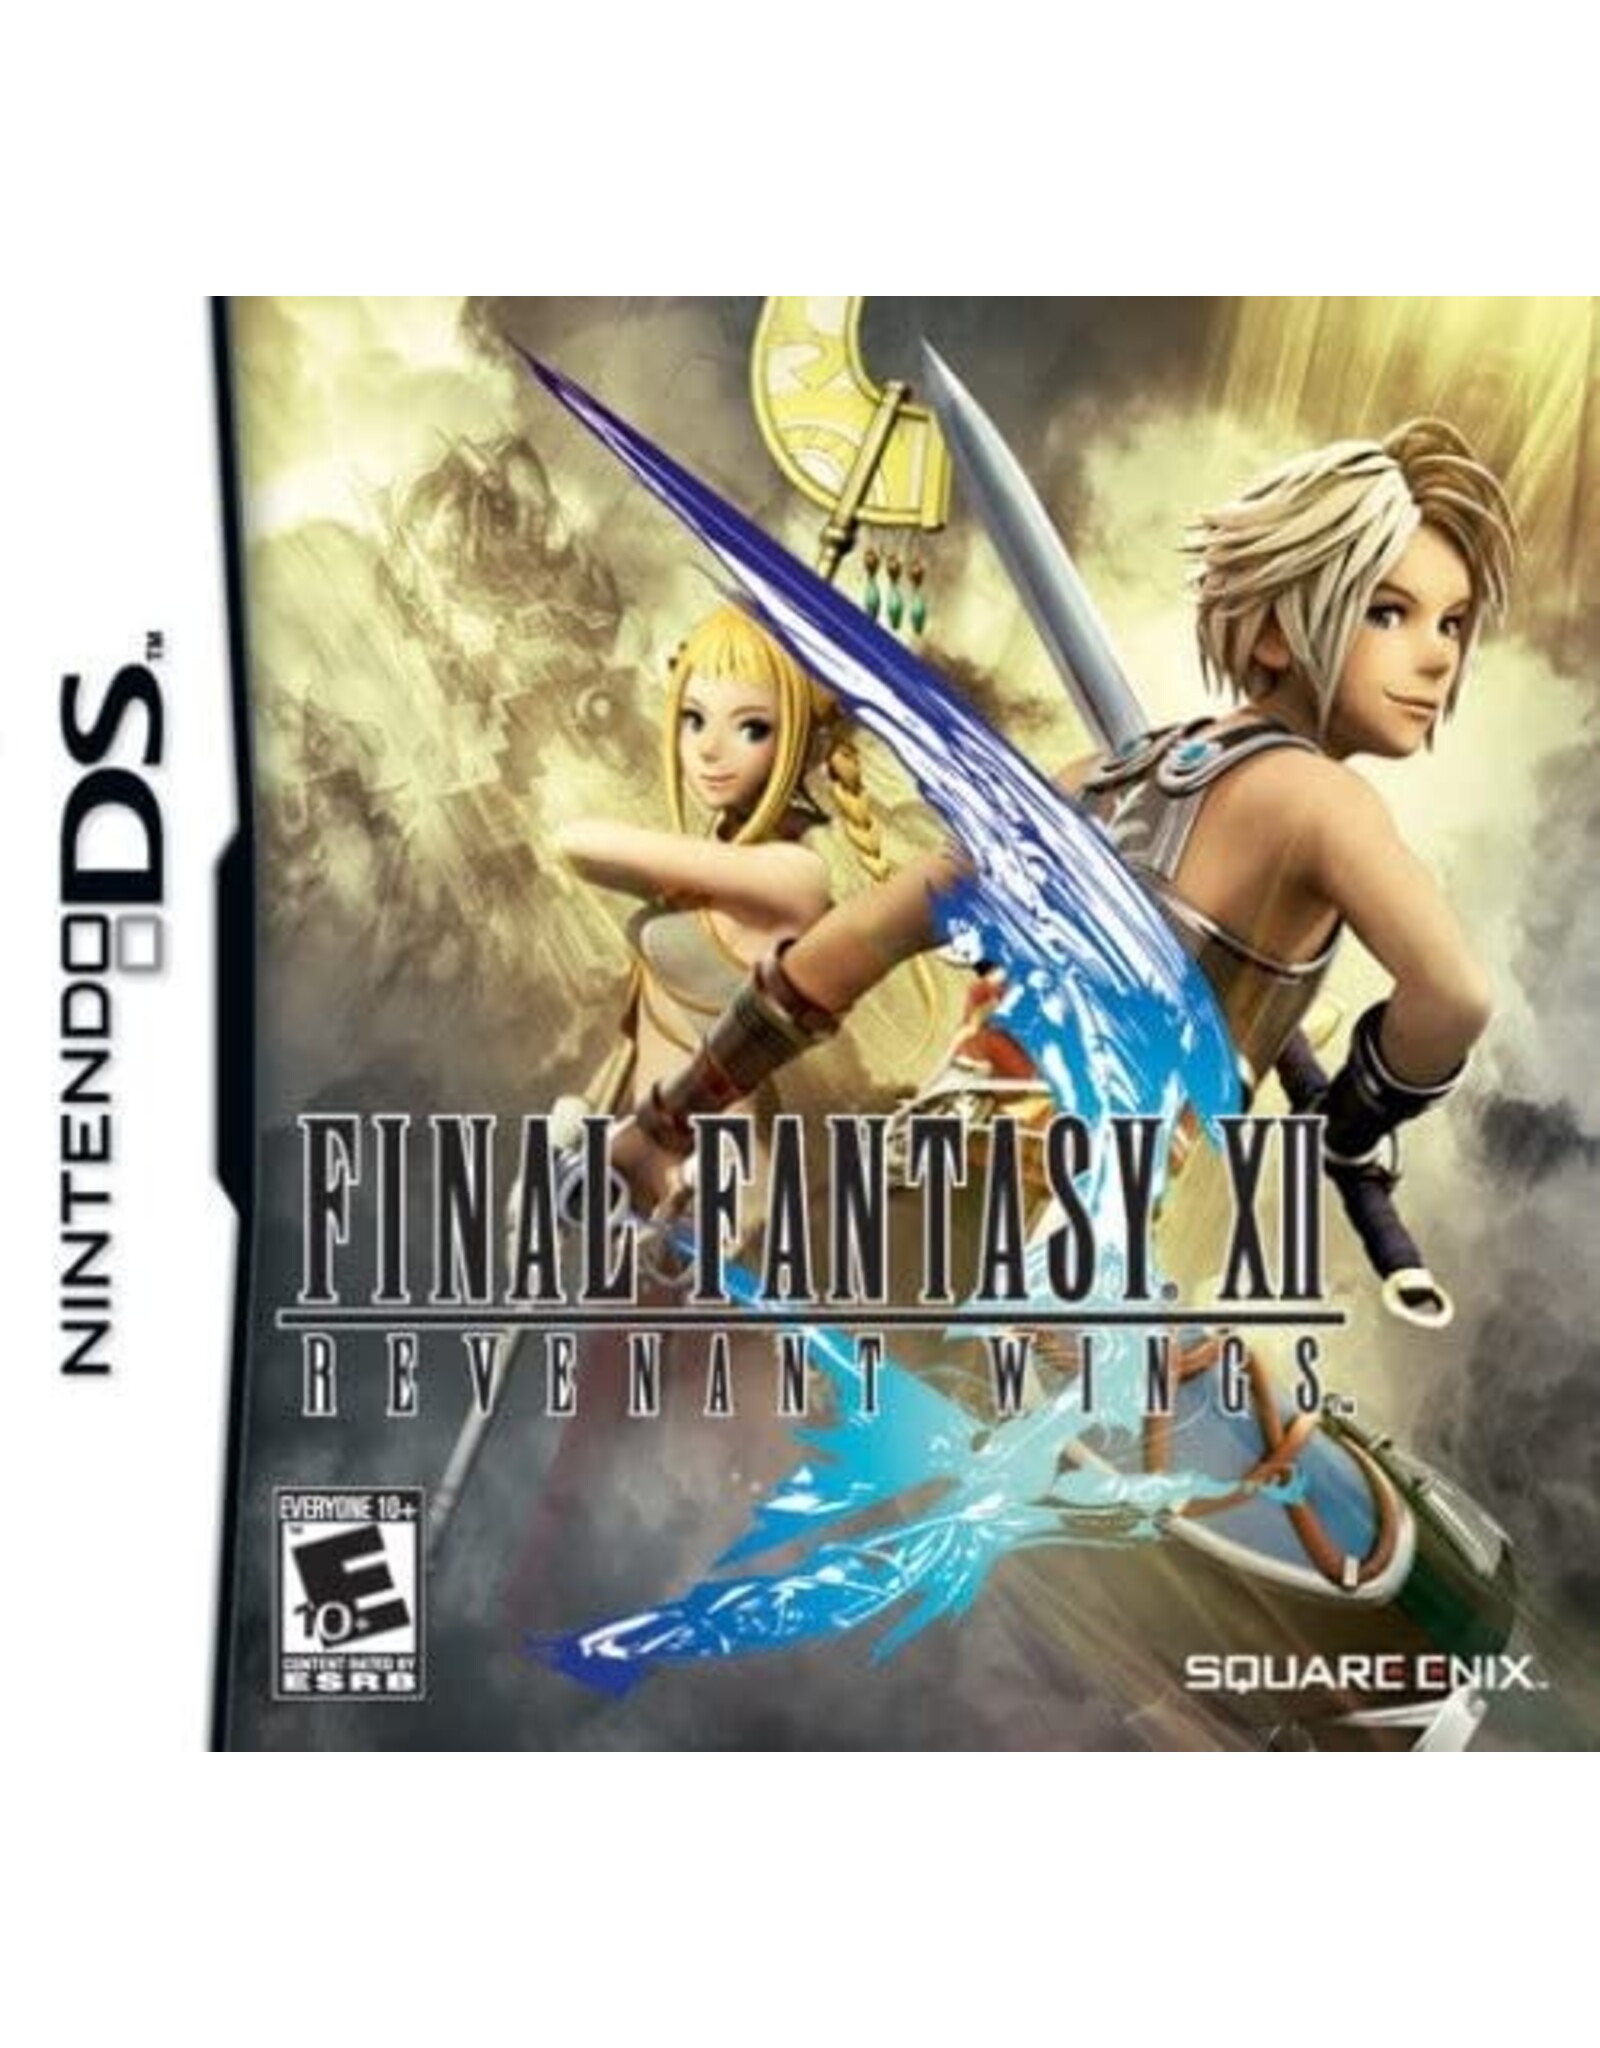 Nintendo DS Final Fantasy XII Revenant Wings (Used, Cosmetic Damage)